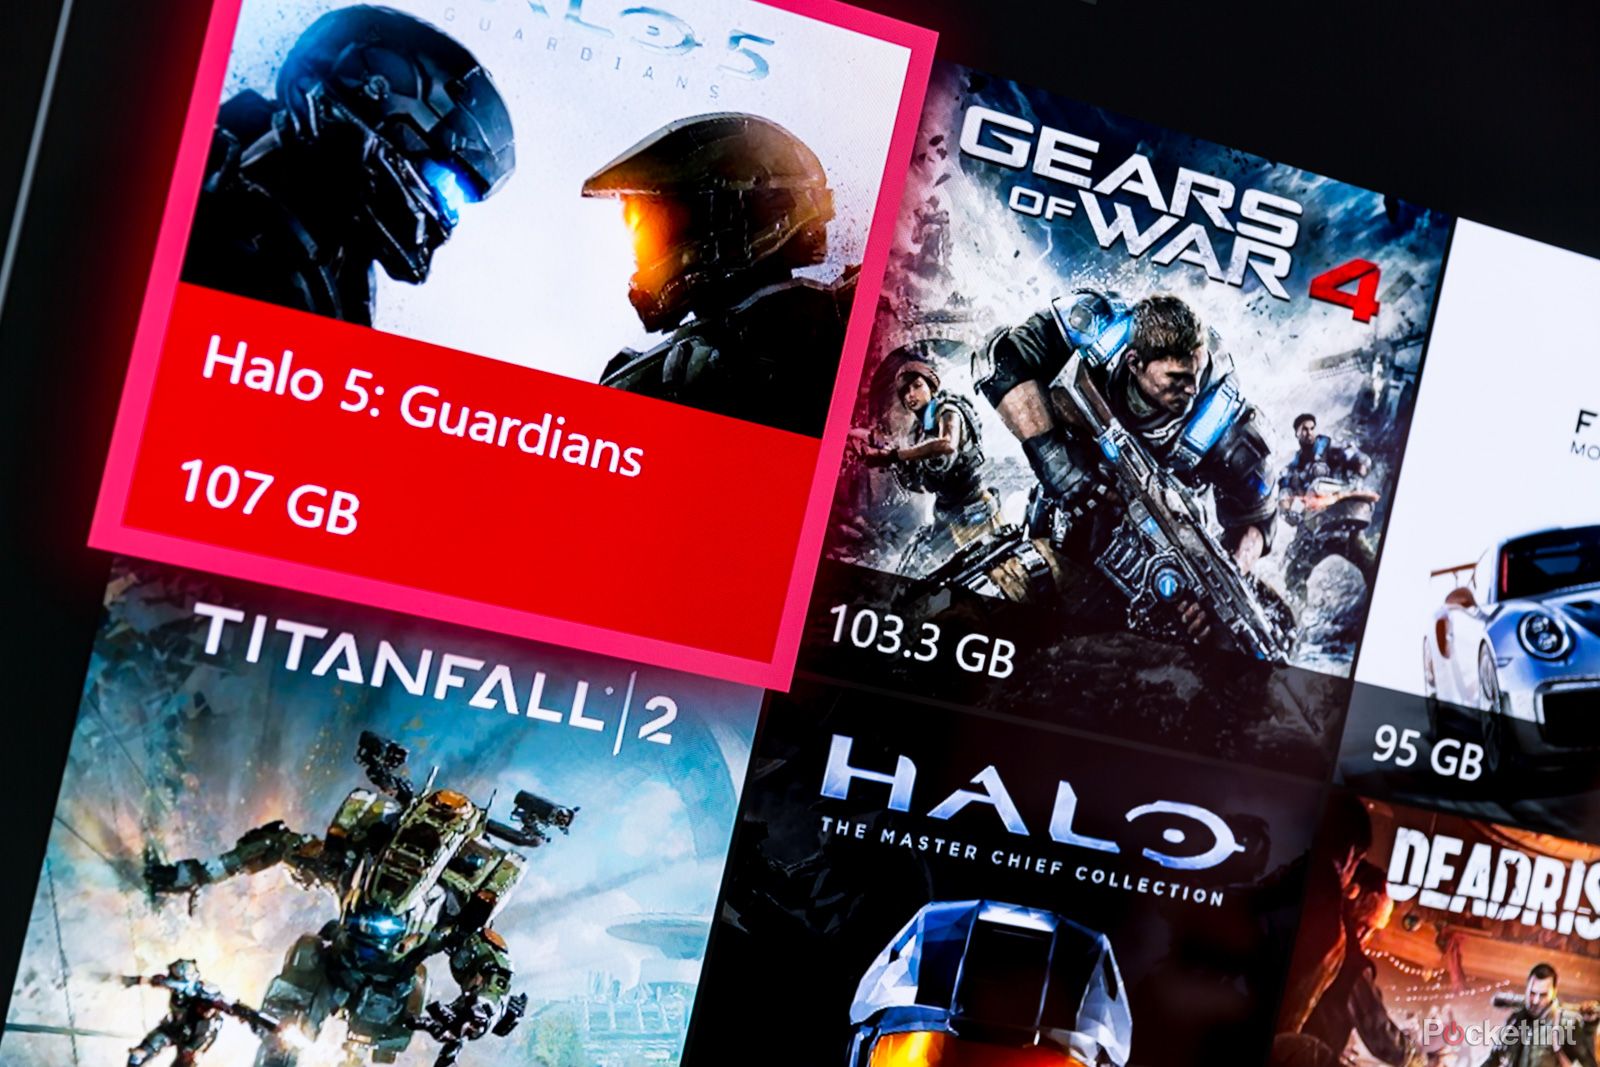 How To Upgrade Your Xbox One Storage By 2tb And More Thats Up To 100 Additional Games image 6